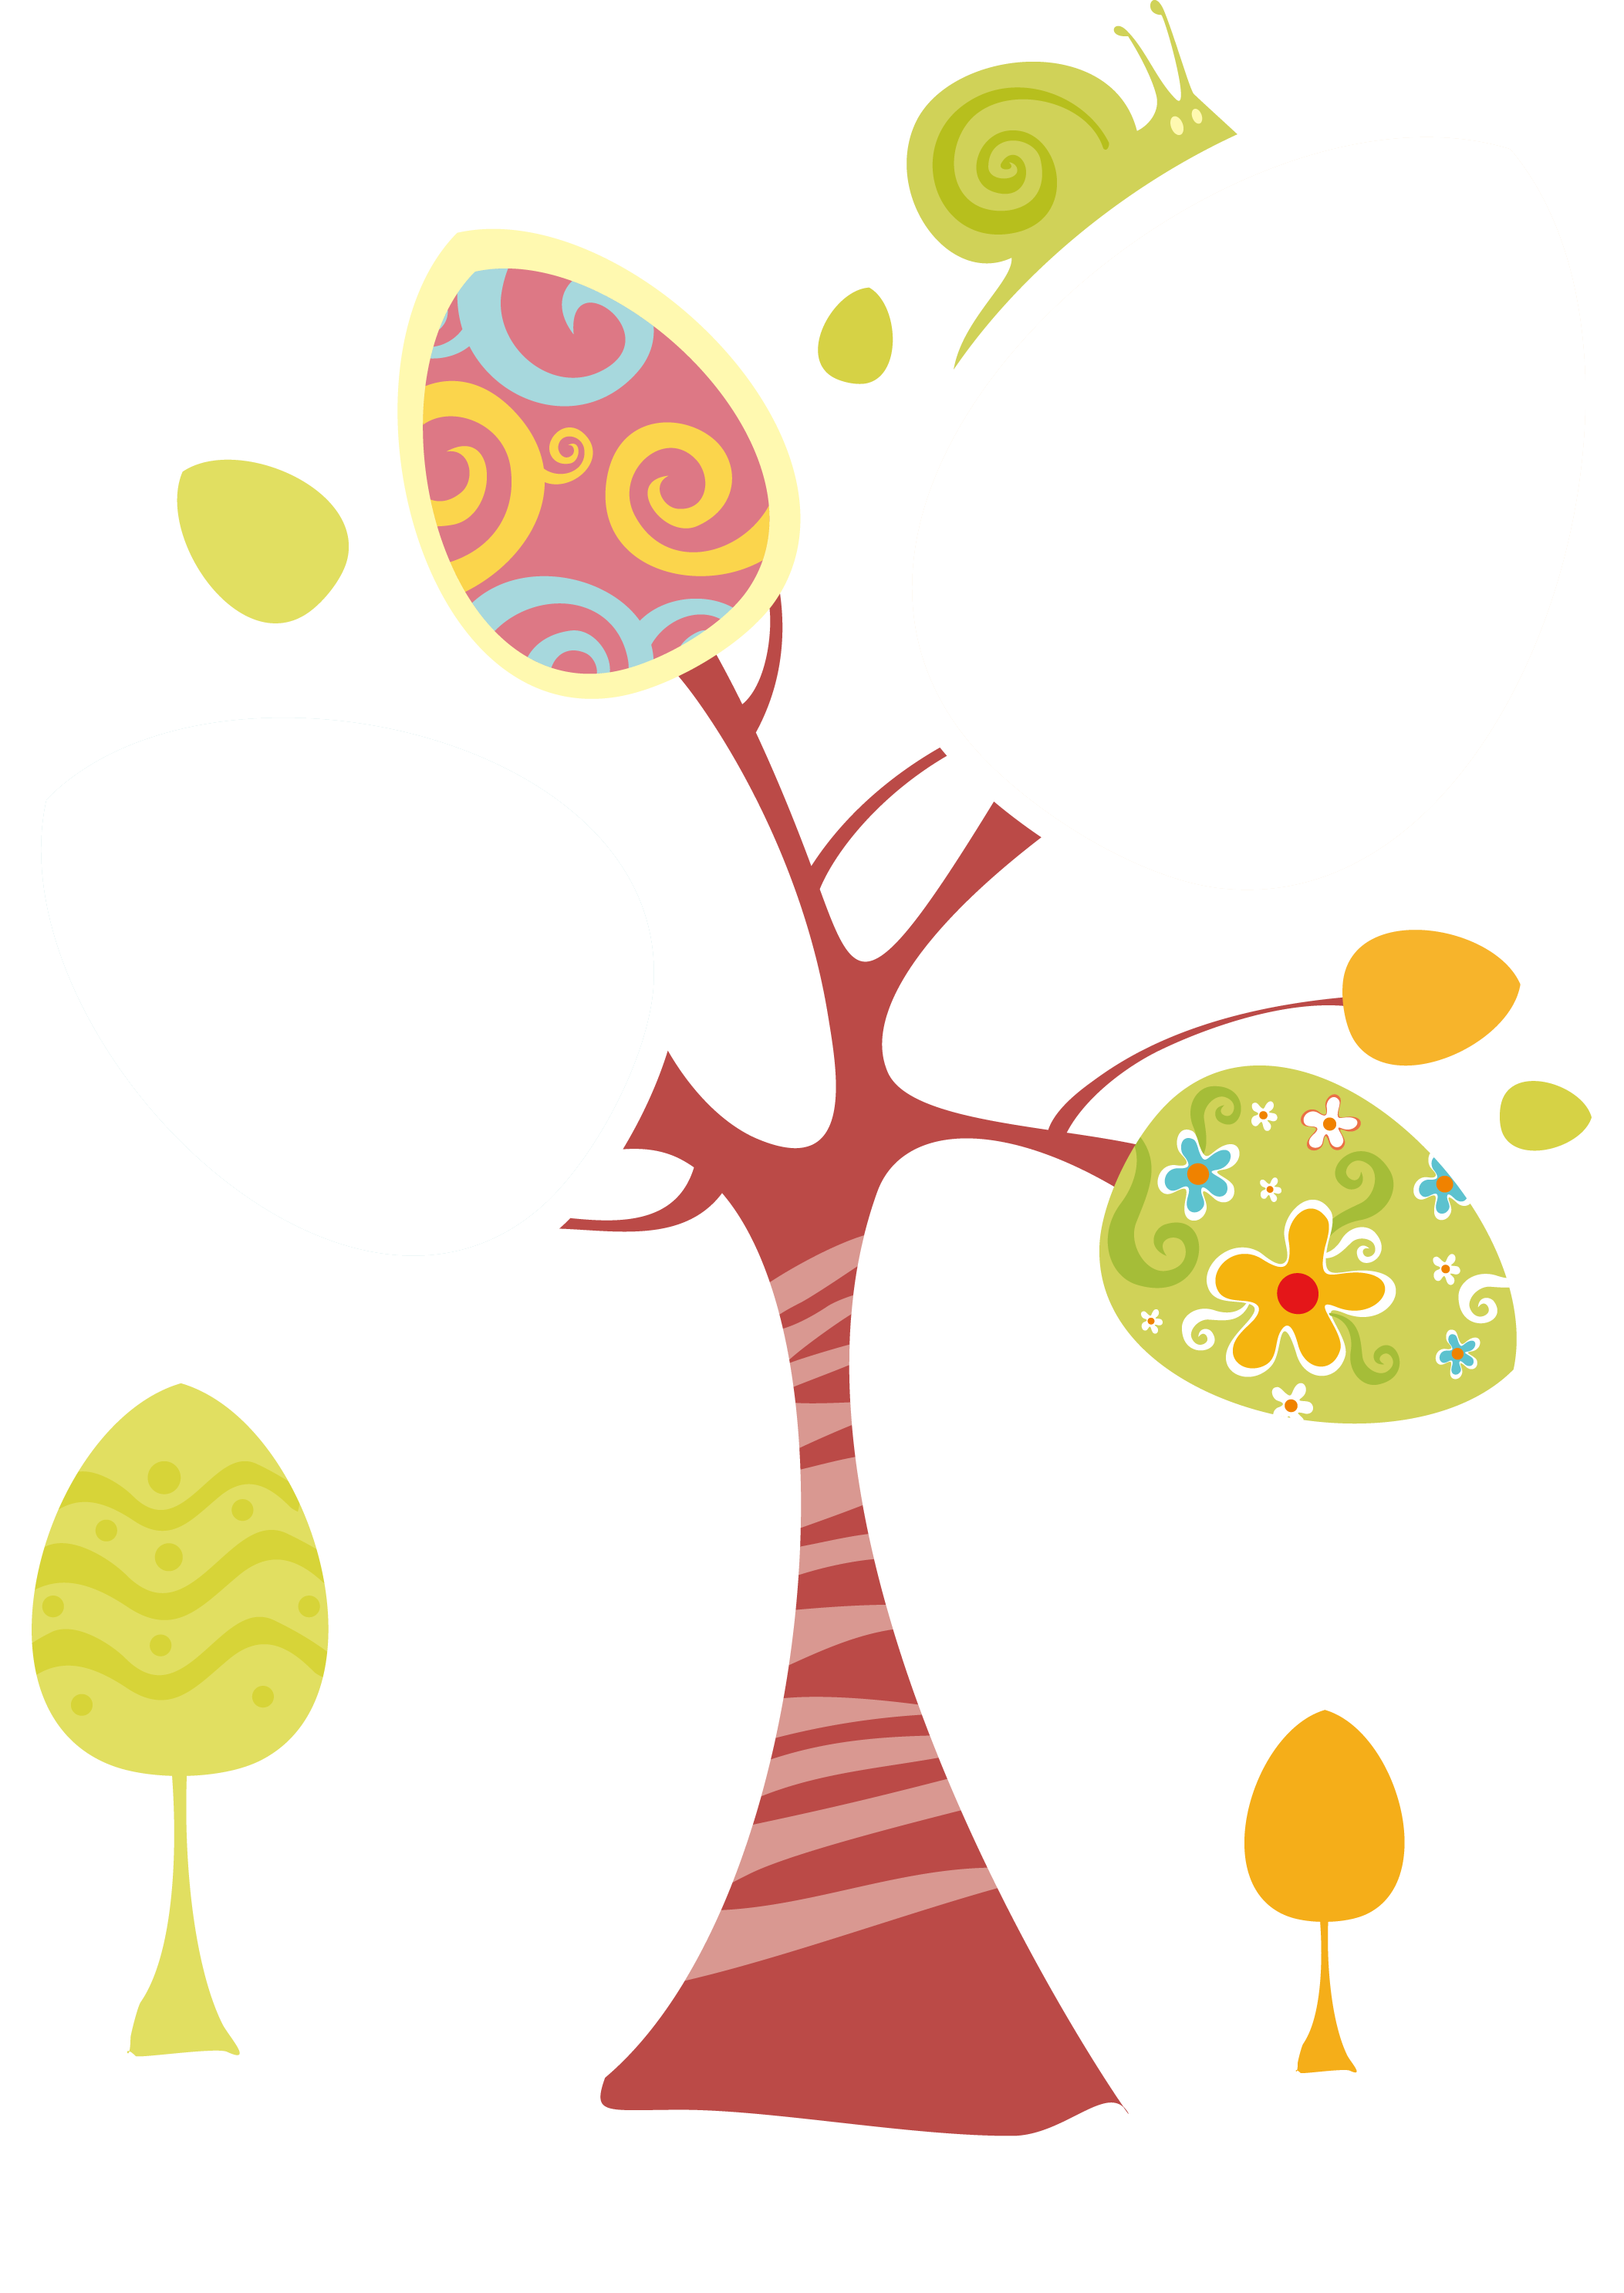 Child Painting Growth Record Material - Eggs On Spring Tree Easter Greeting For Sister Card (2105x2972)